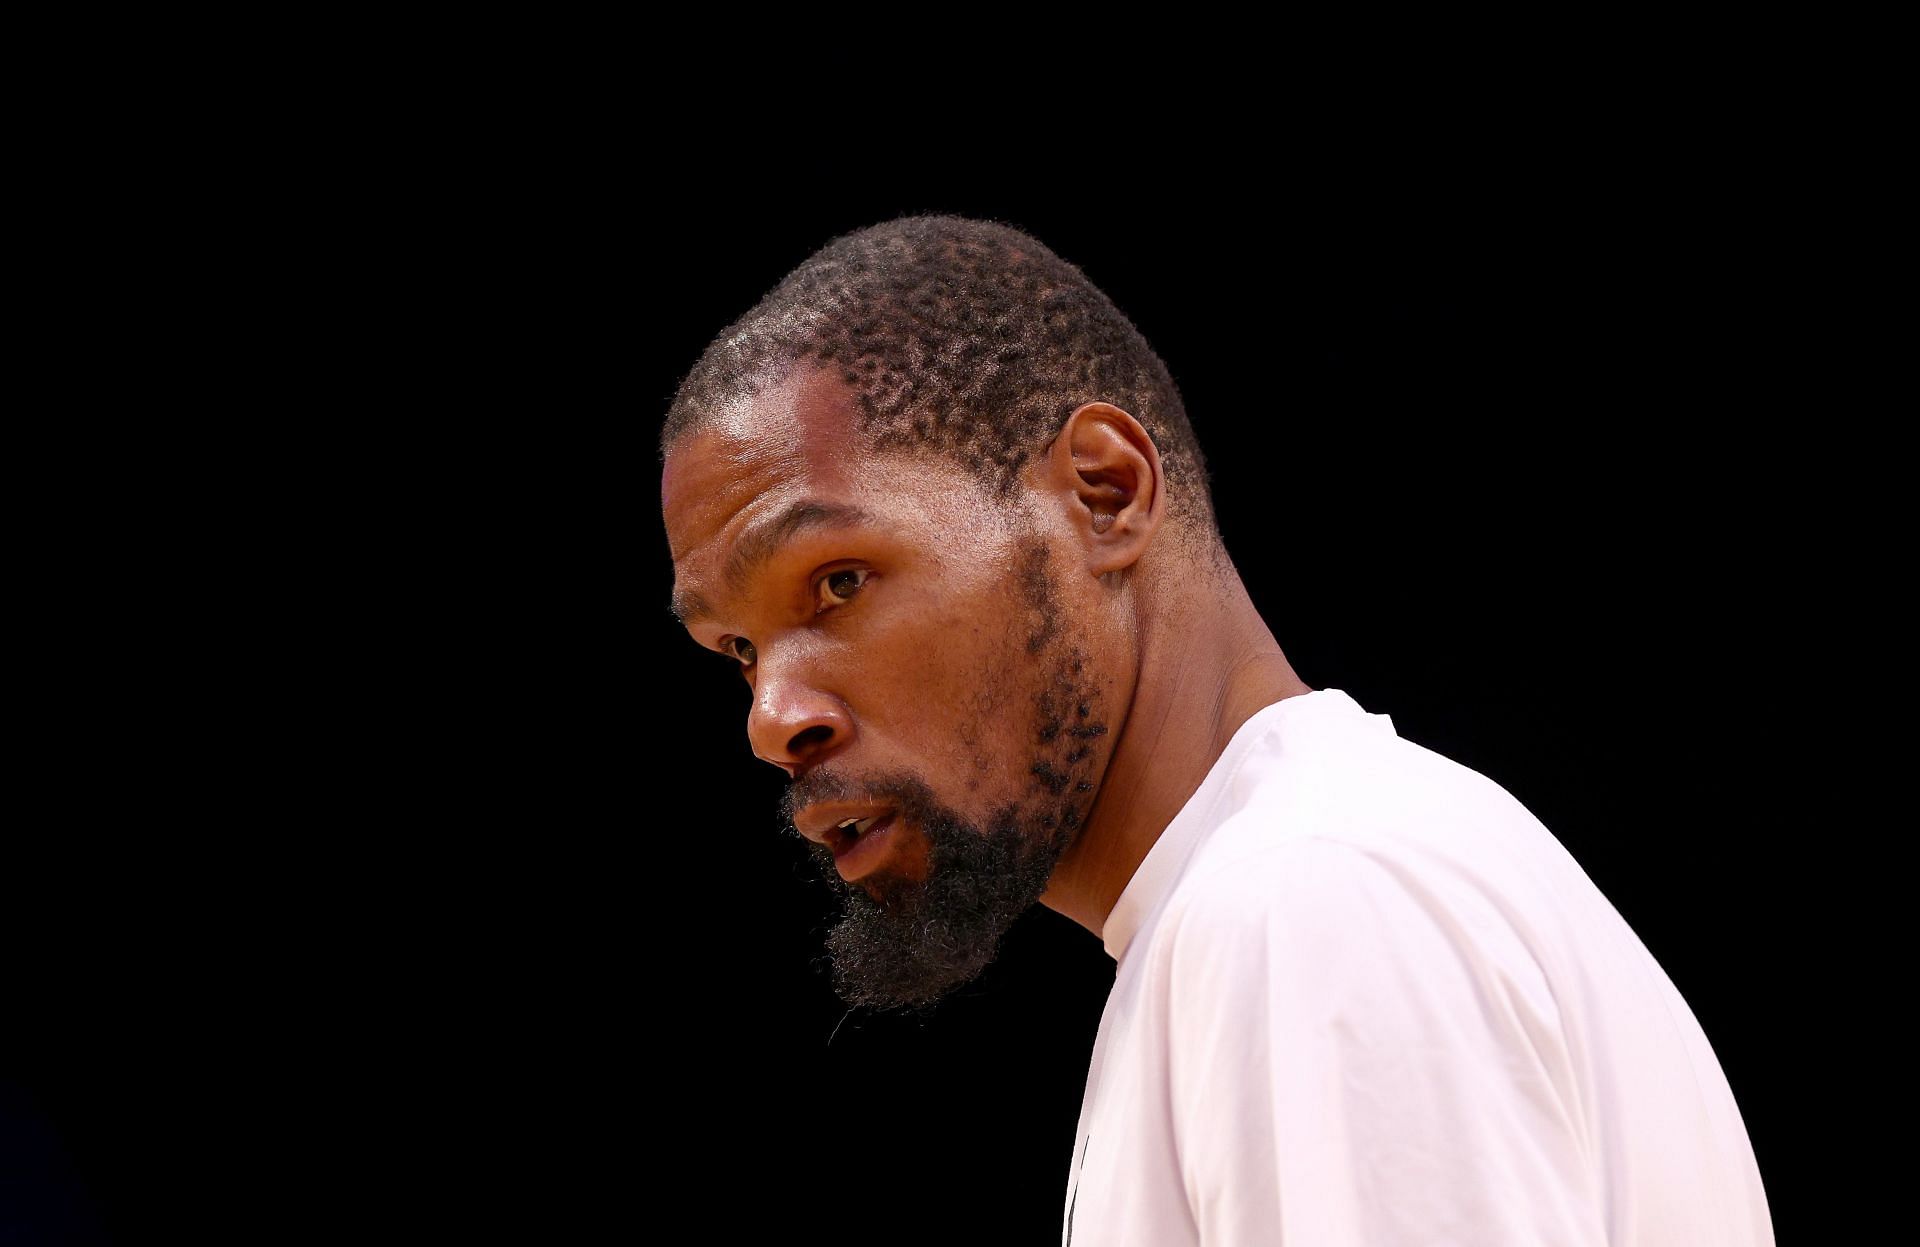 Kevin Durant of the Brooklyn Nets during the 2022 NBA Playoffs